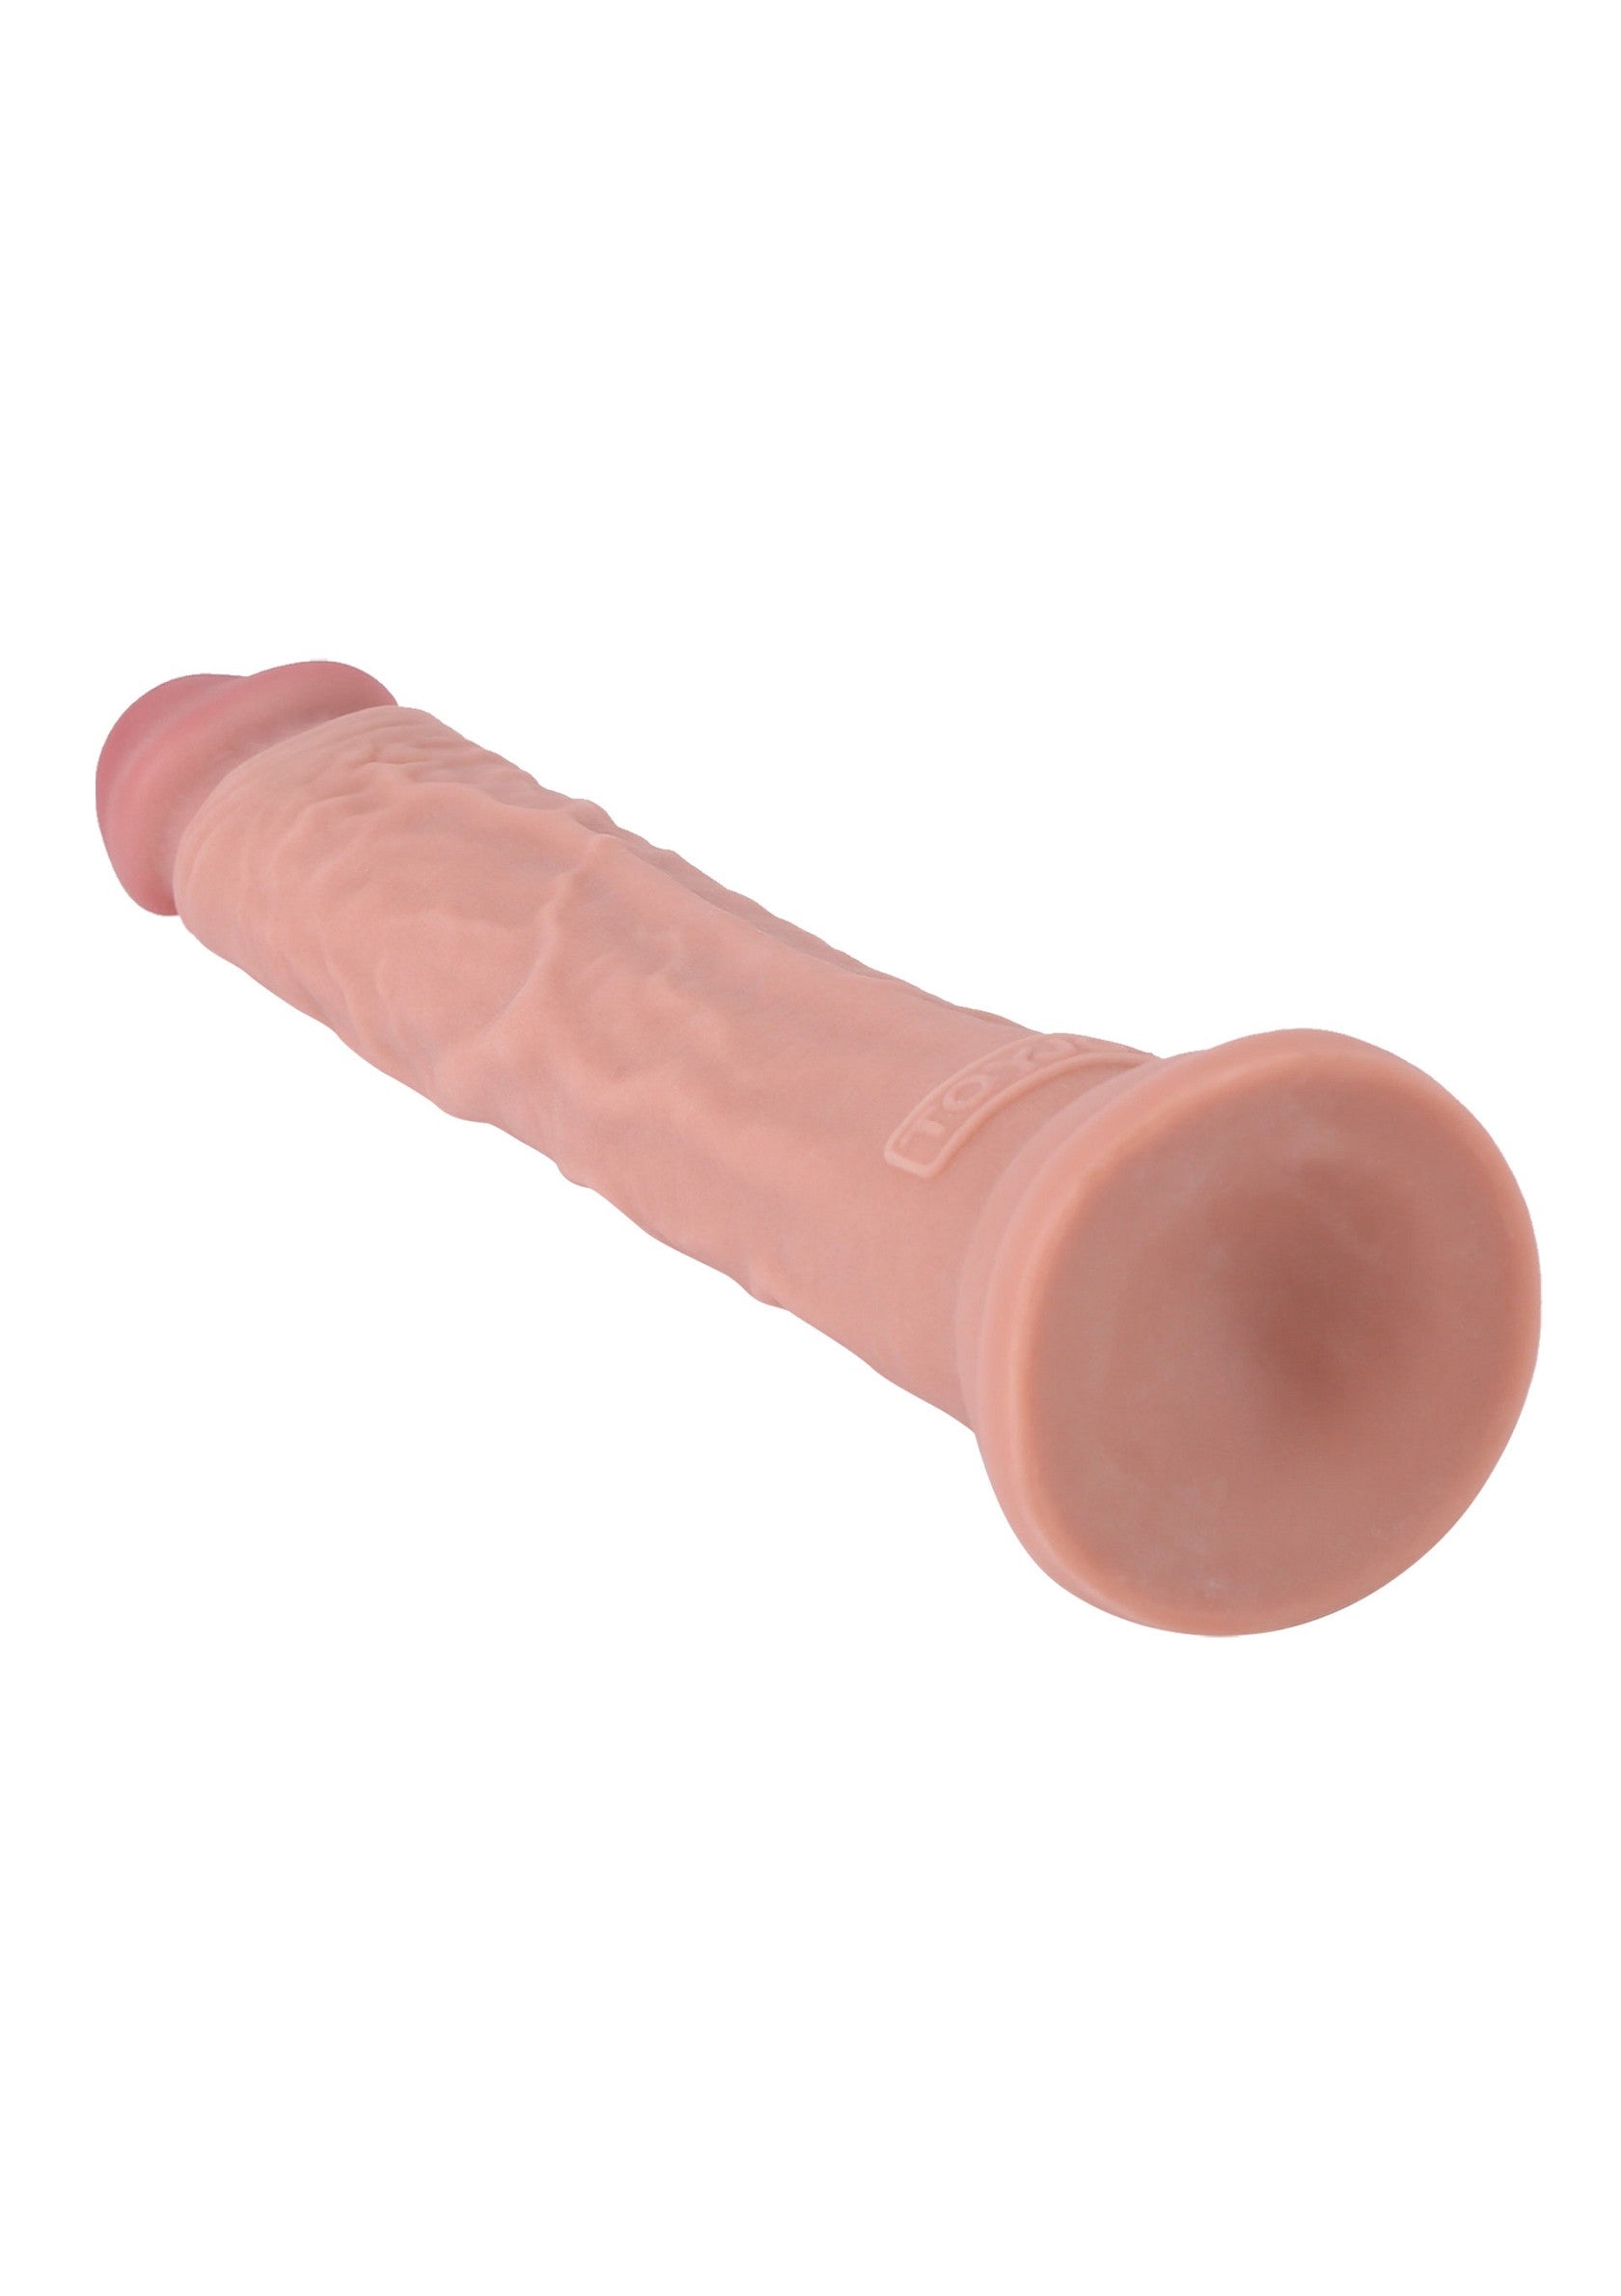 ToyJoy Get Real Deluxe Dual Density Dong 11' SKIN - 0